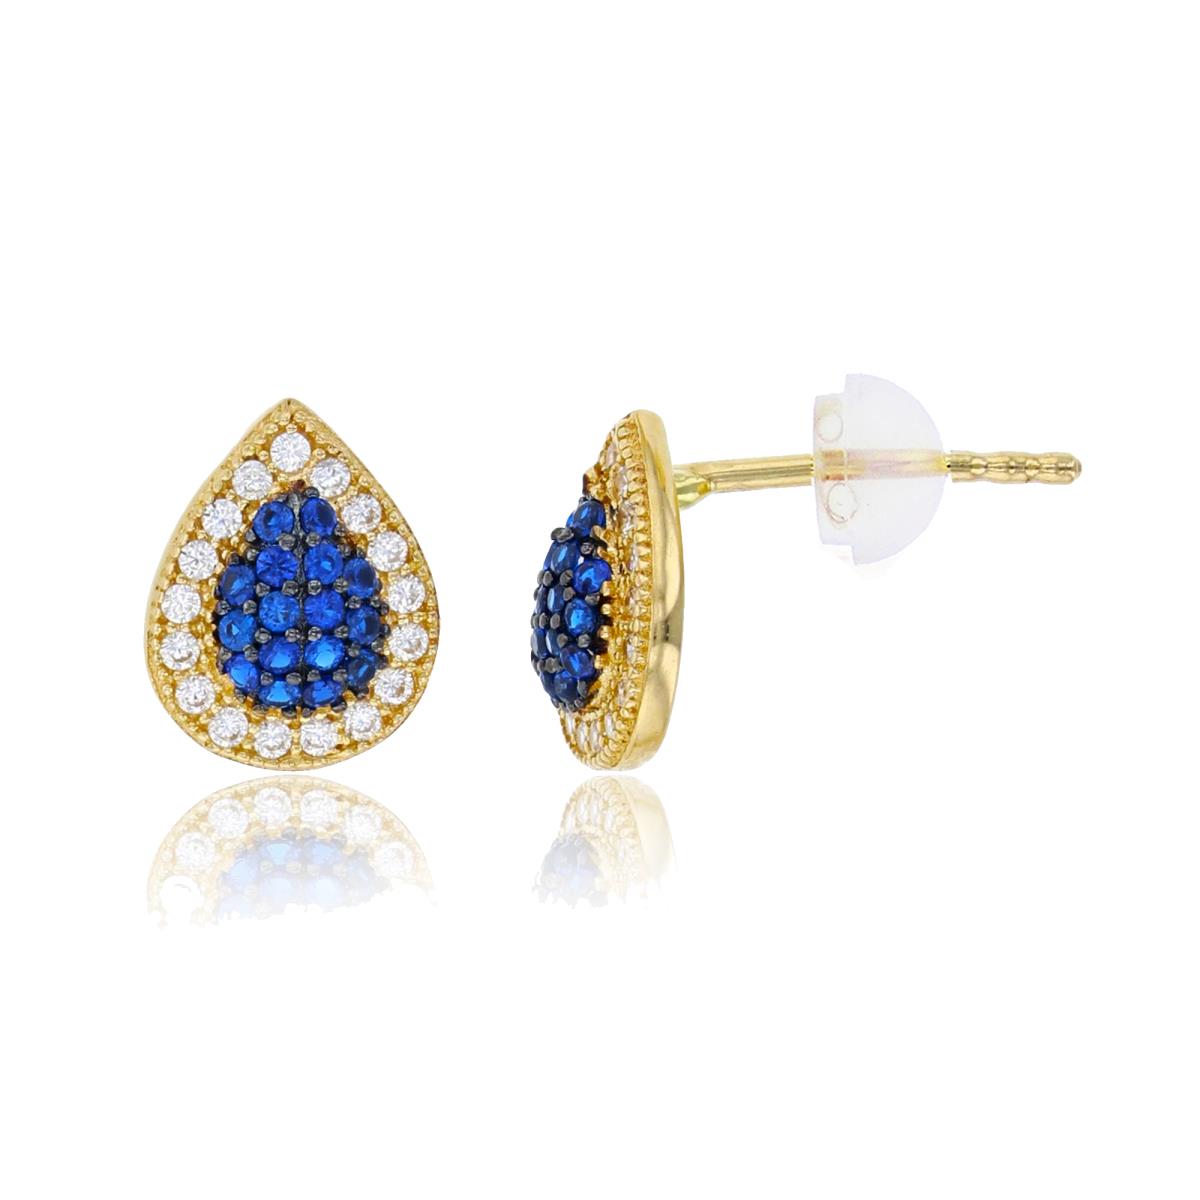 14K Yellow Gold 9x8mm Micropave Sapphire & White CZ Domed Pear-Shaped Stud Earring with Silicone Back